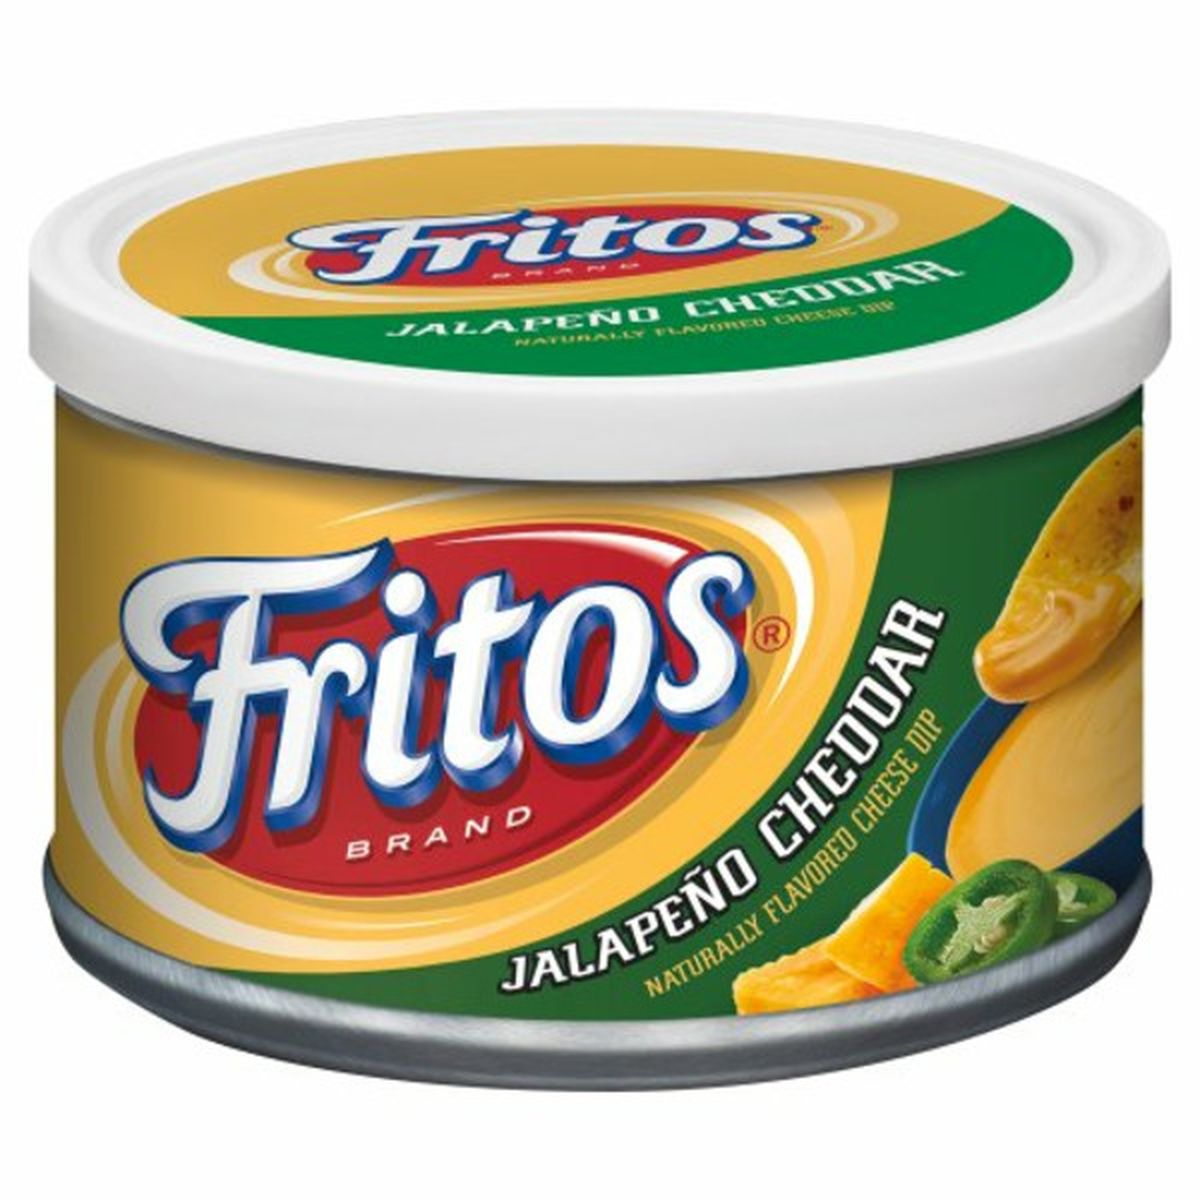 Calories in Fritos Dip, Jalapeno & Cheddar Flavored Cheese